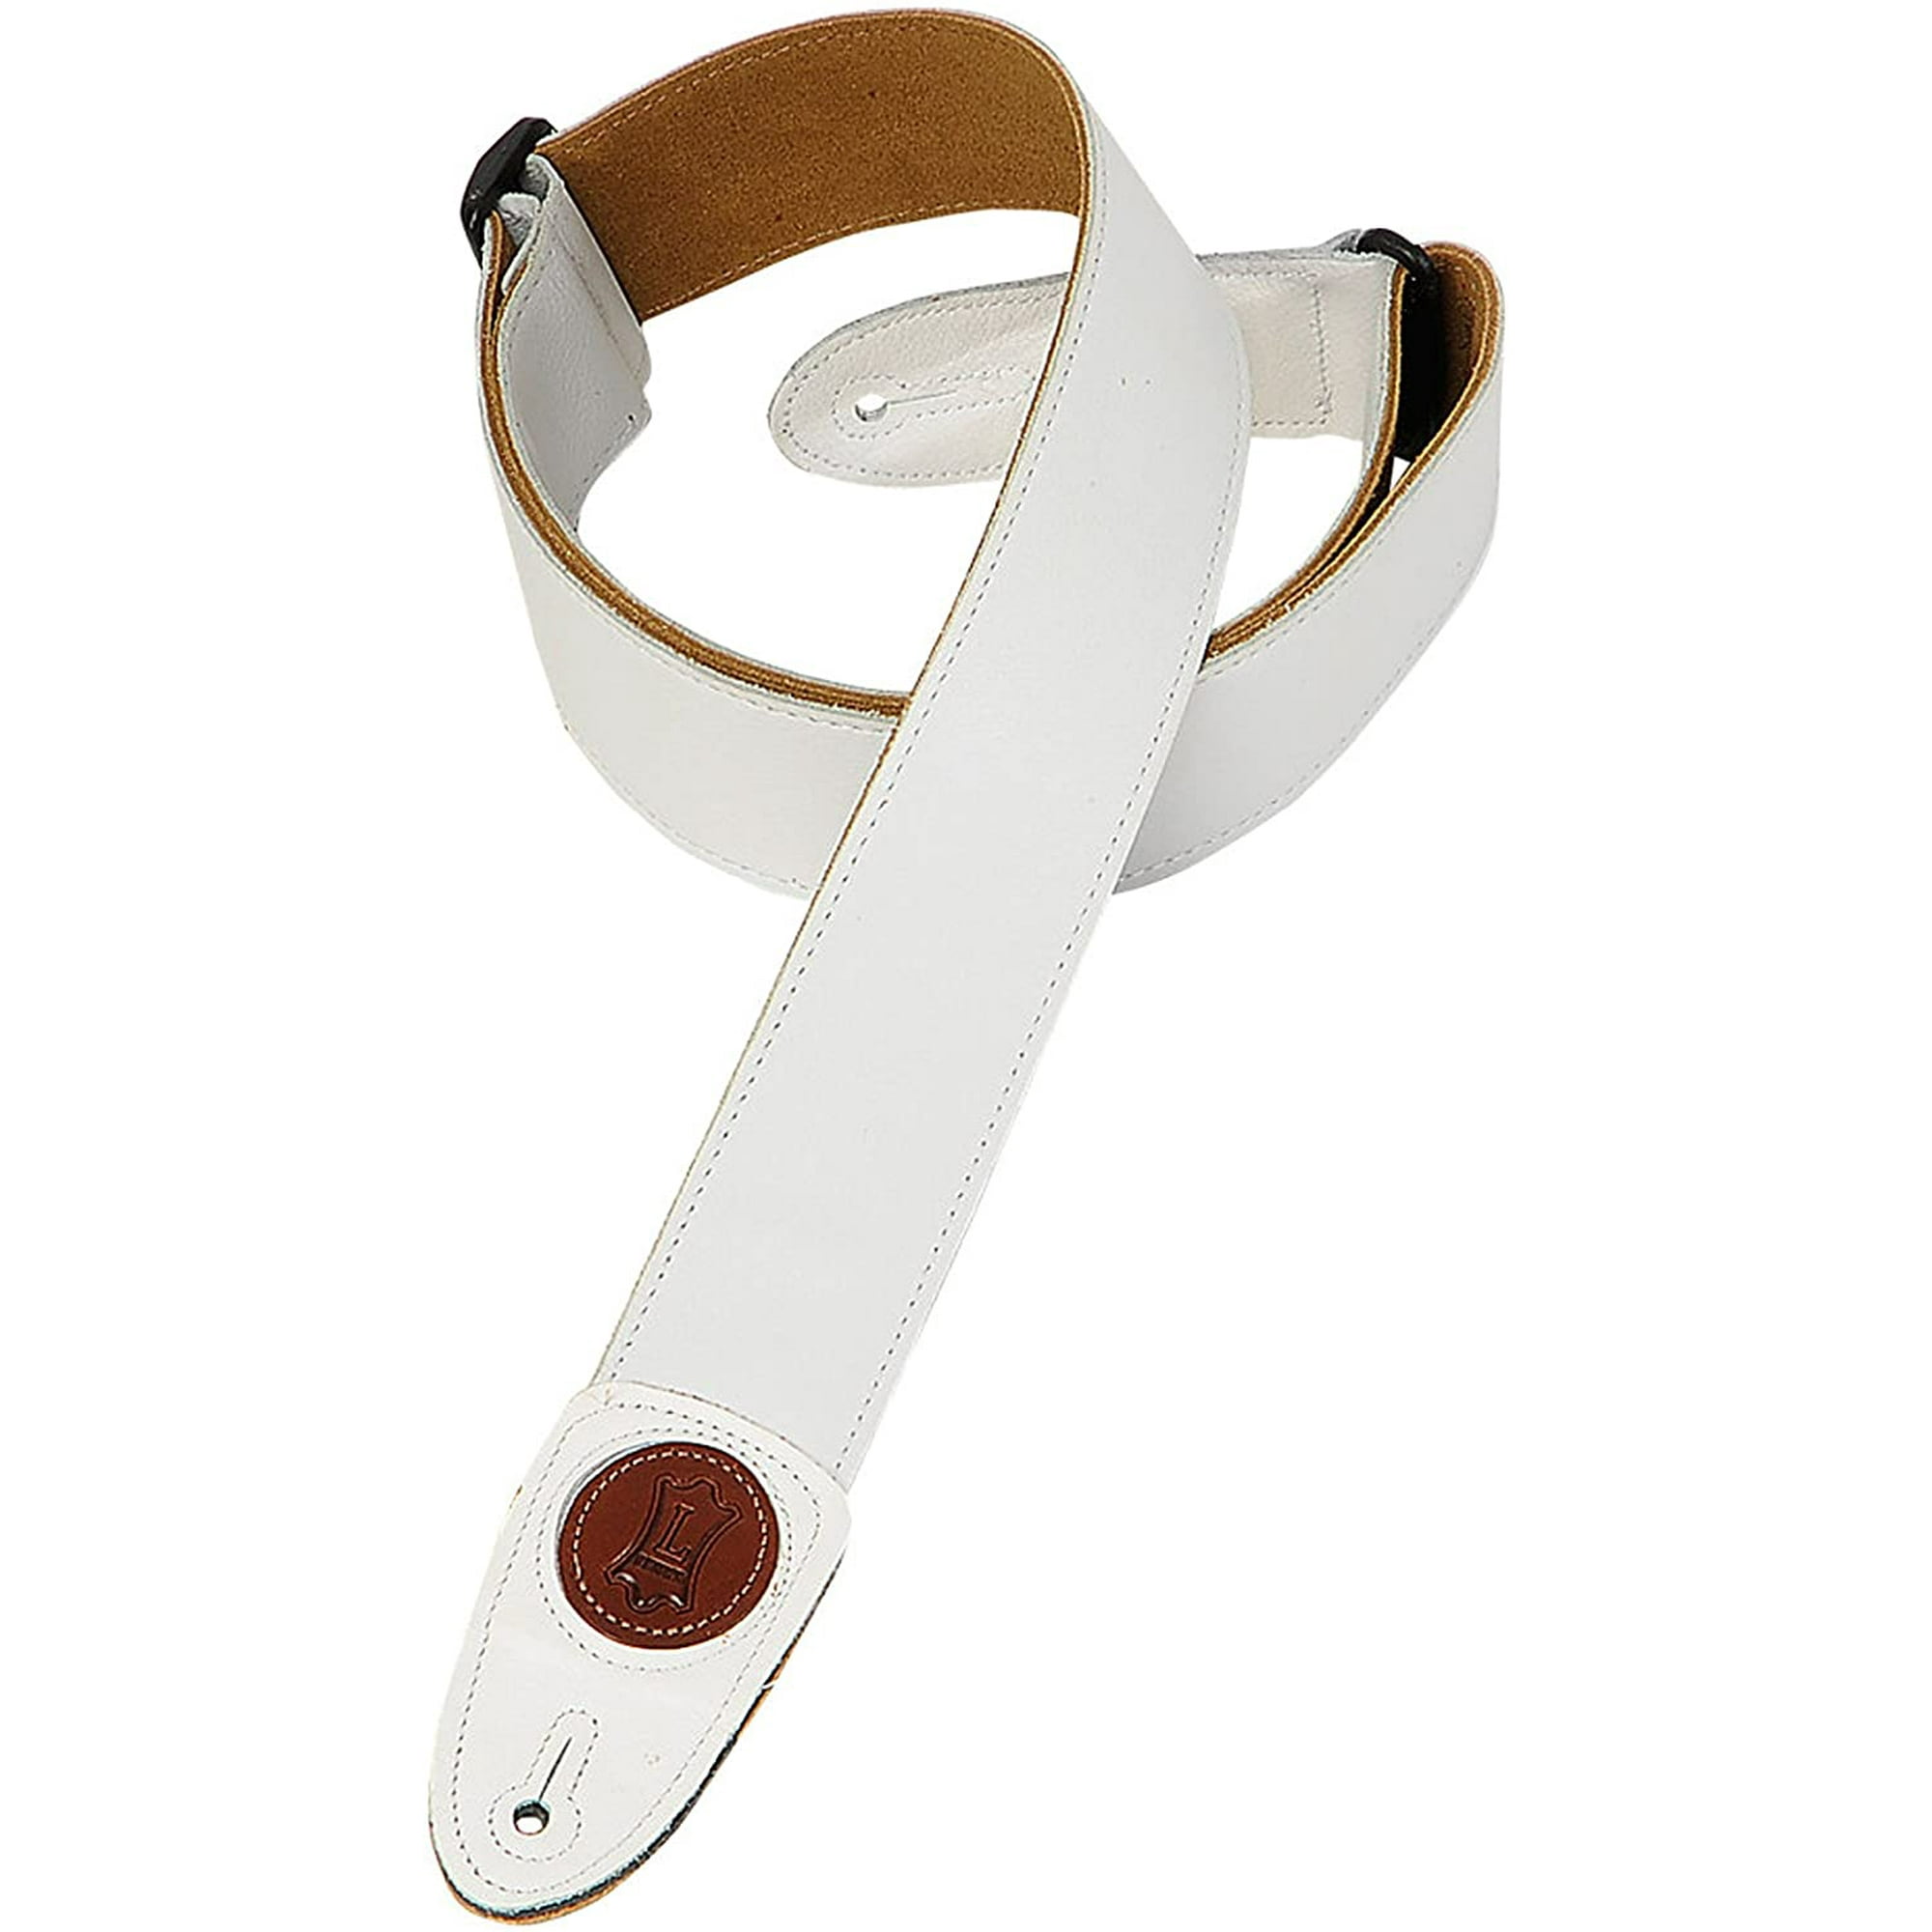 Levy's Leathers MSS7G-WHT Suede-Leather Guitar Strap,White | Walmart Canada